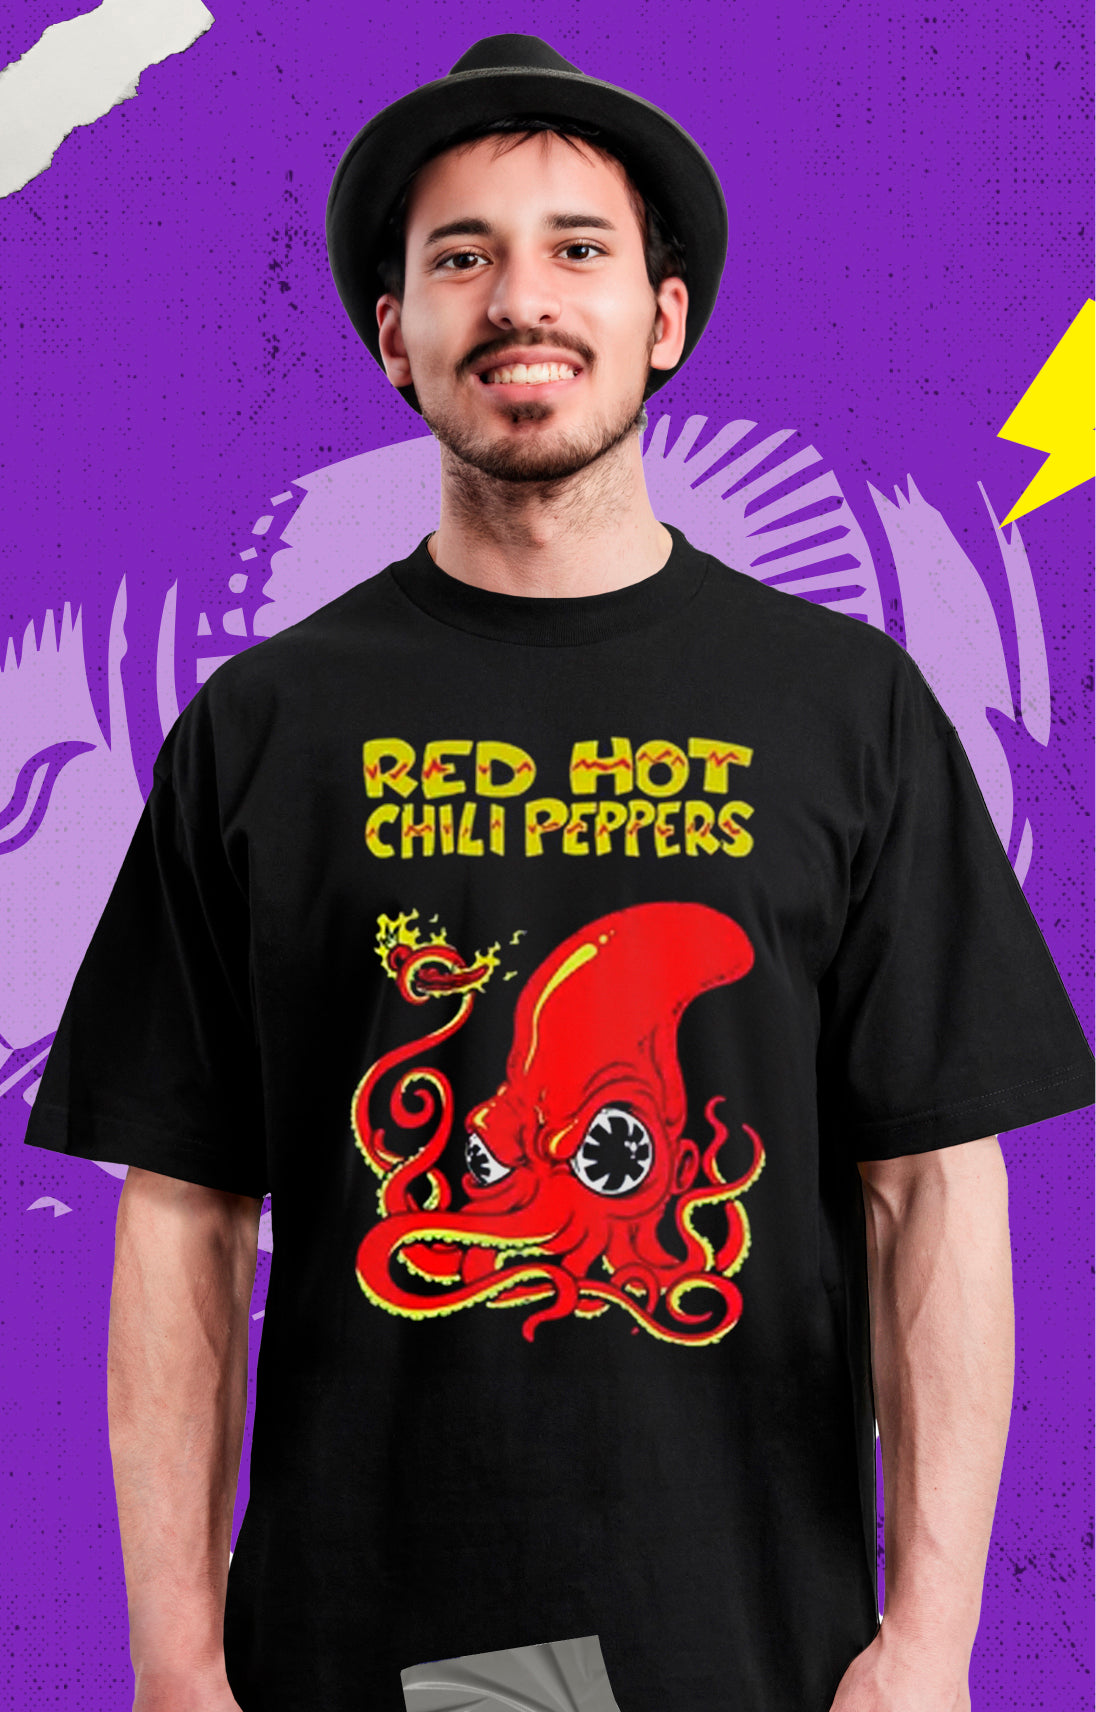 Red Hot Chili Peppers - Funk - Polera